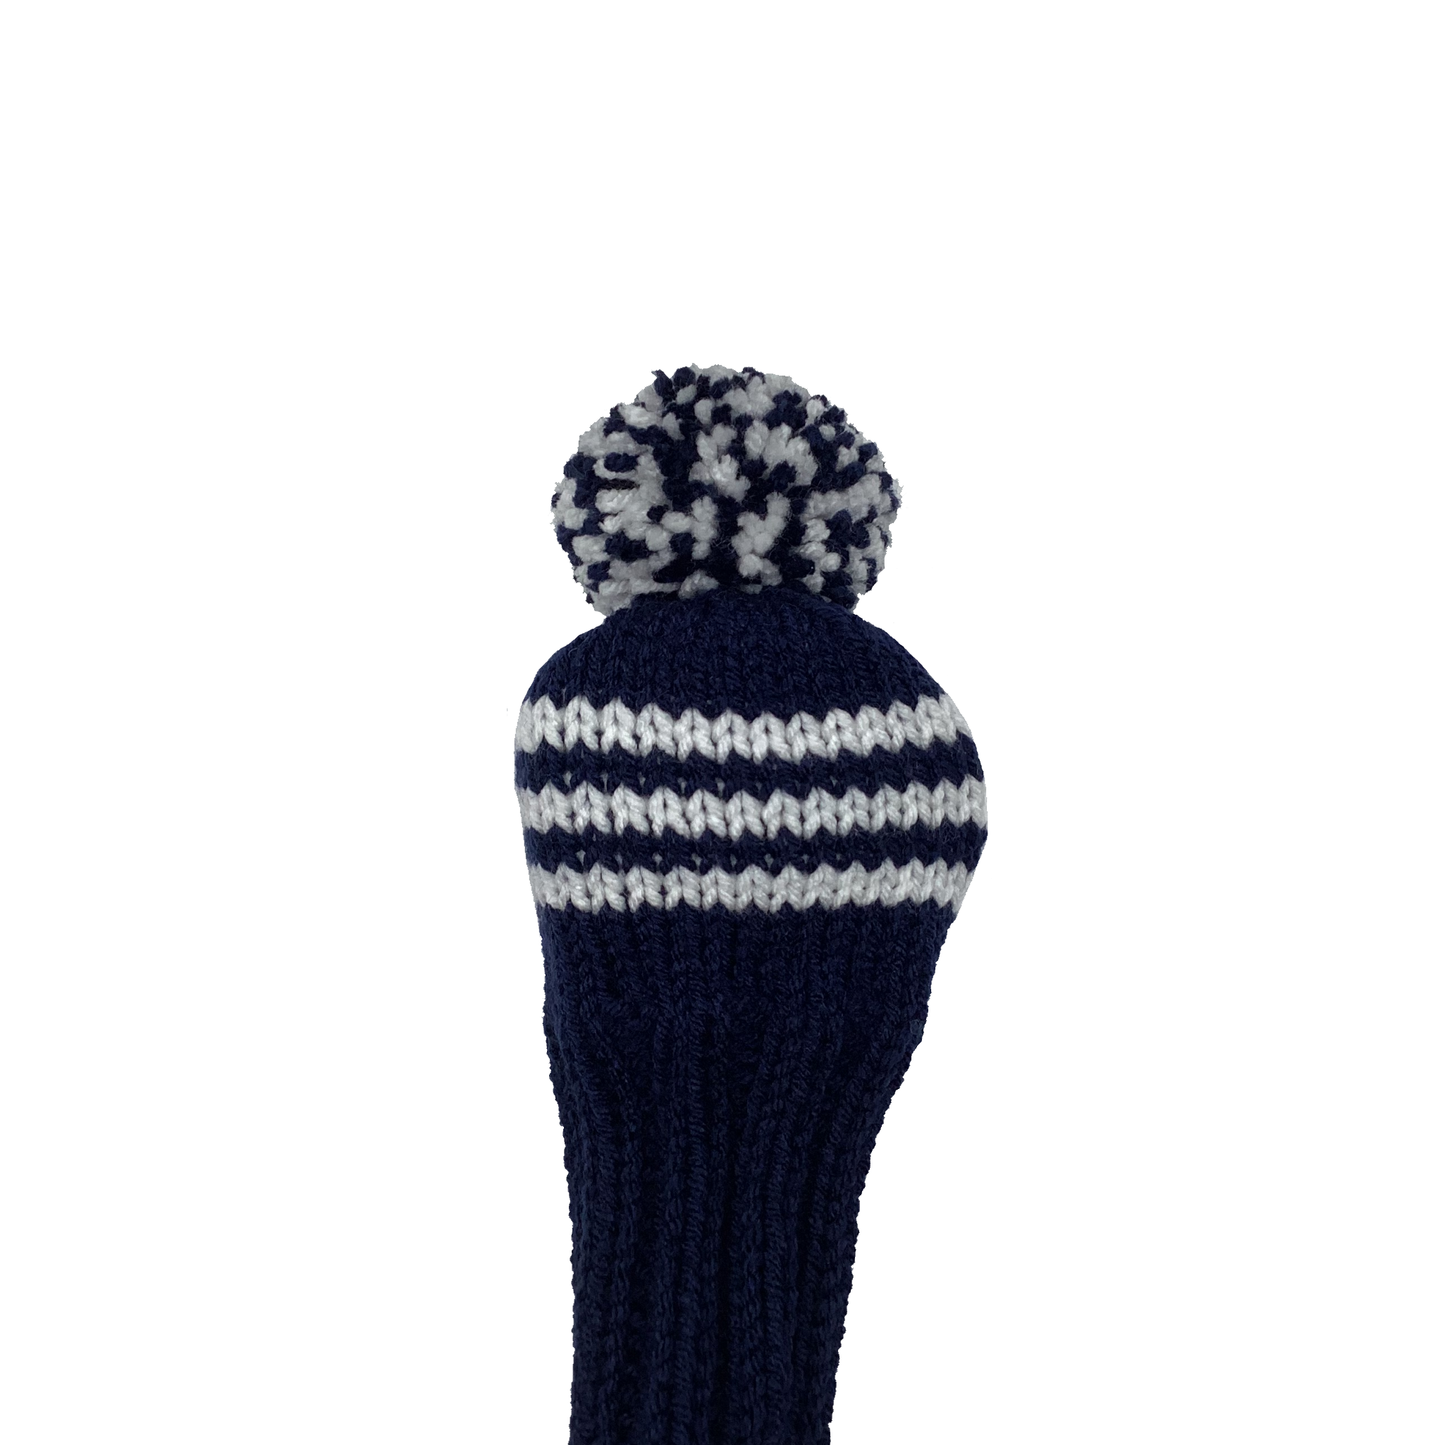 Navy and White - Fairway Wood #3 Headcover